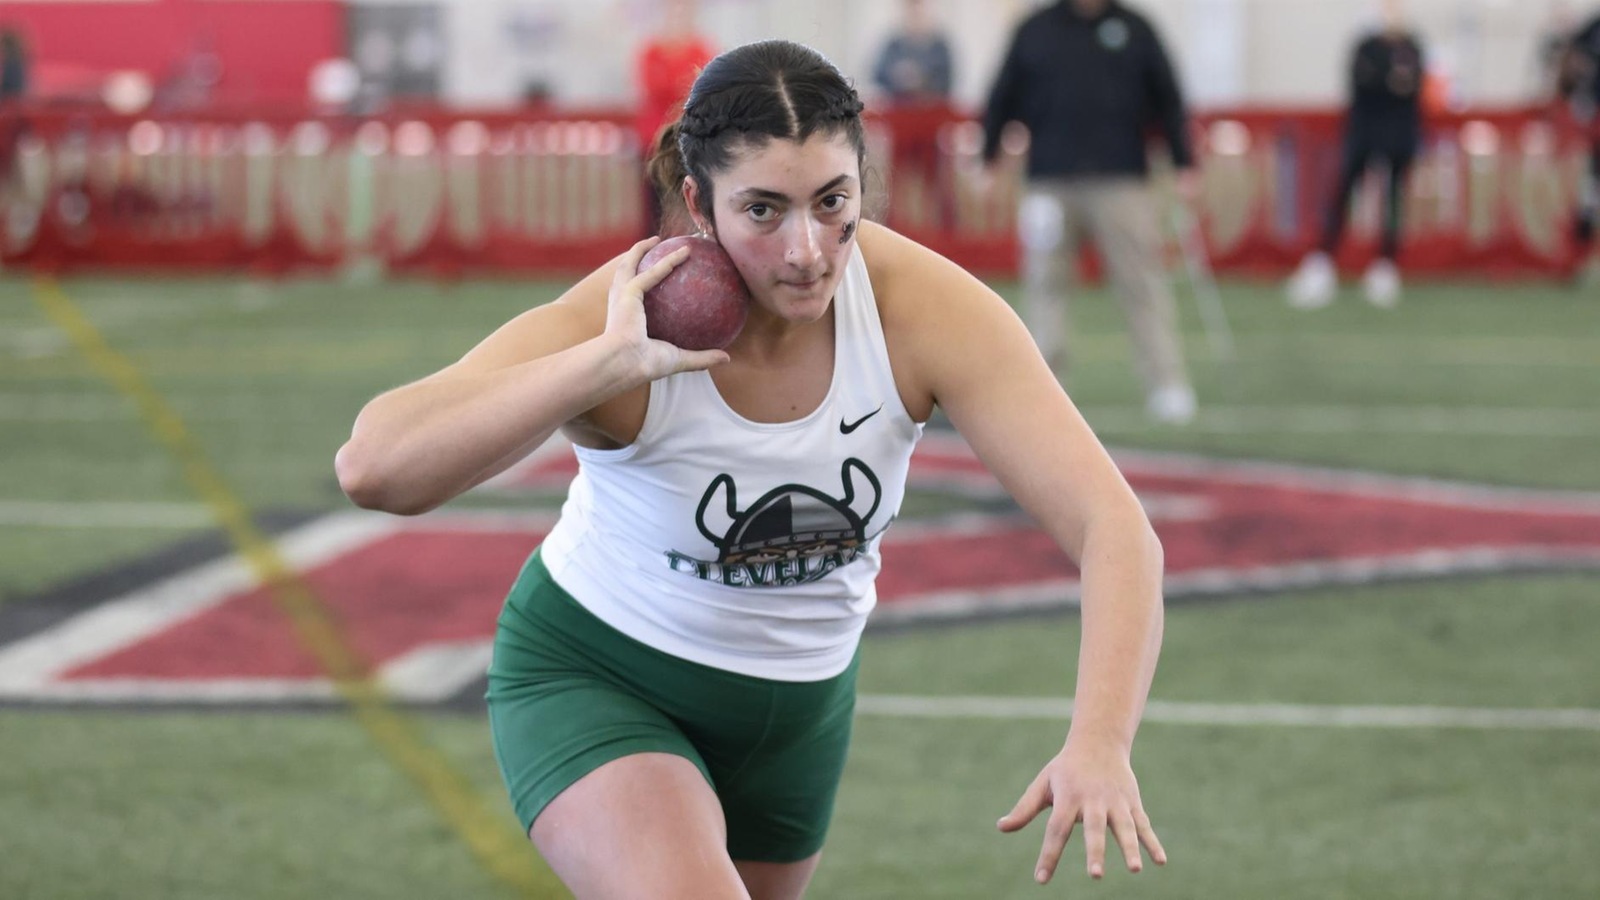 Frye Wins Discus & Javelin Events At Sparky Adams Invitational